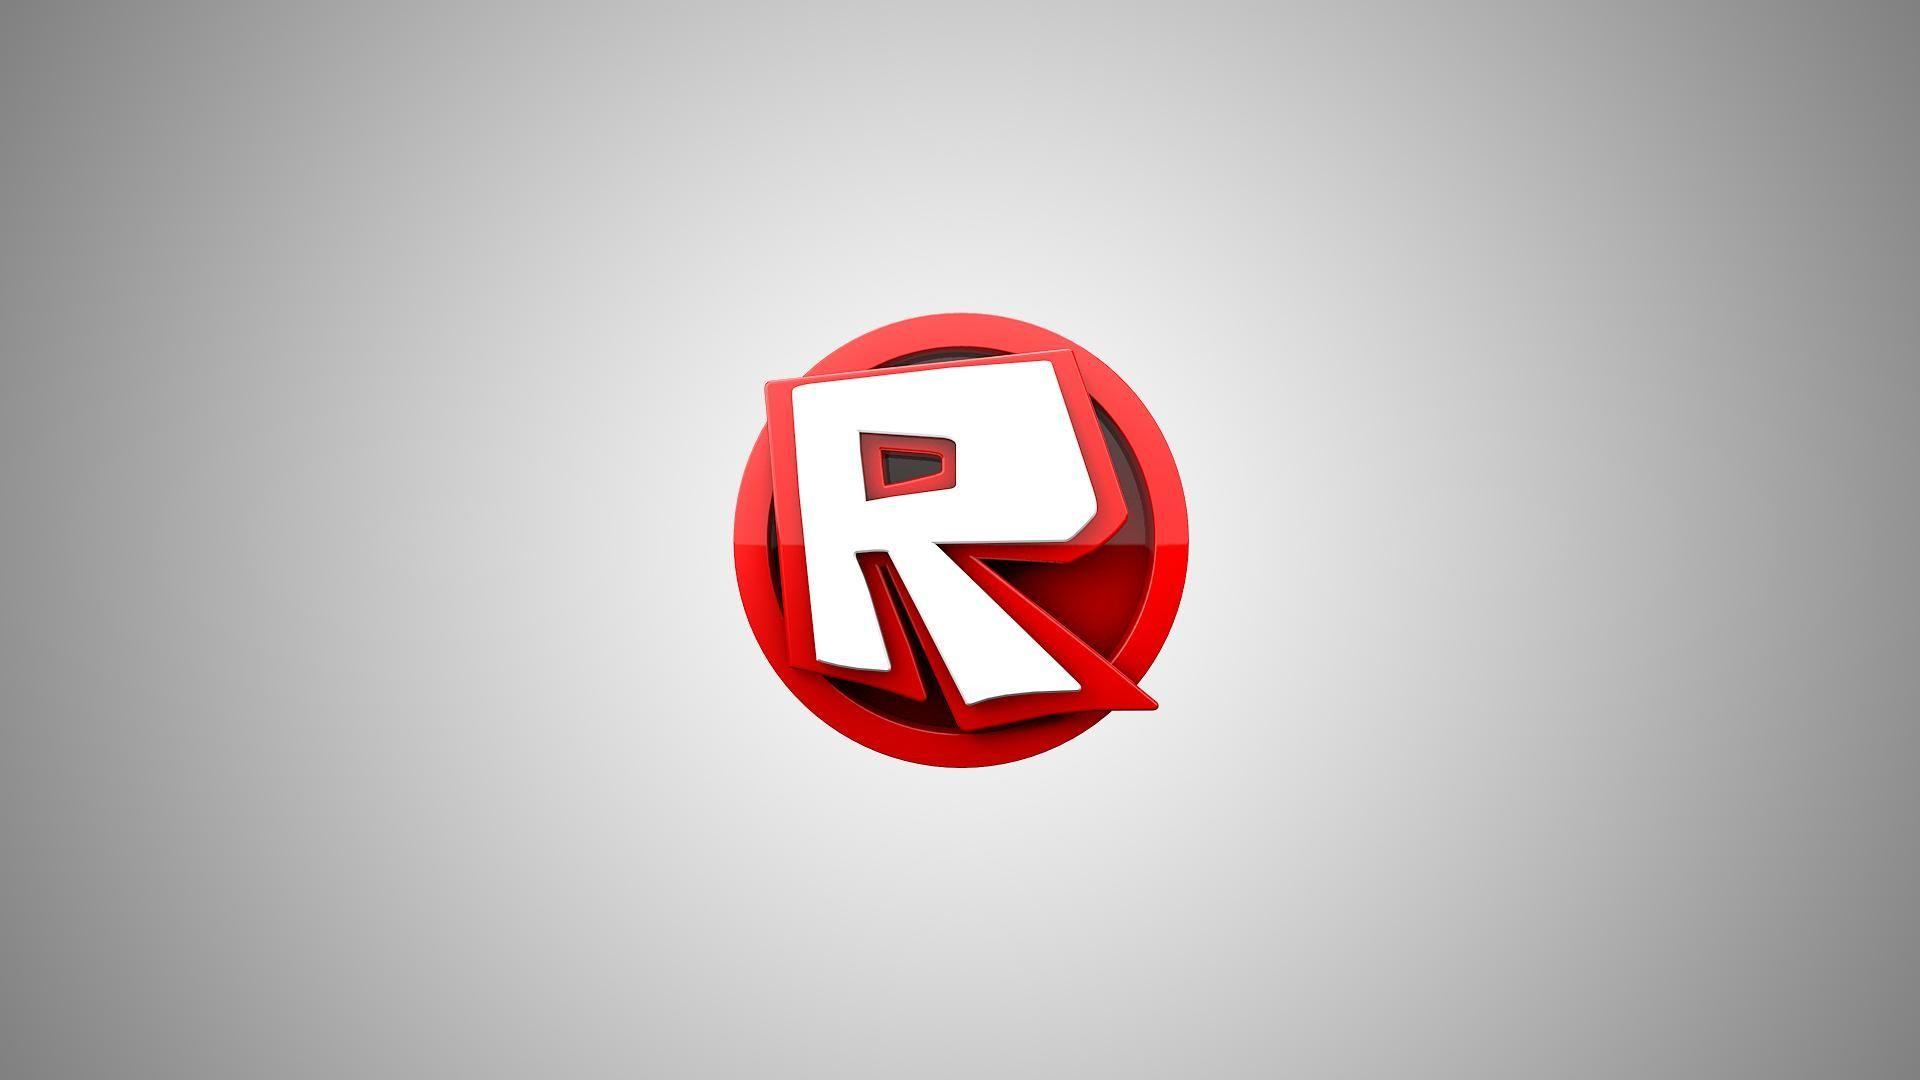 2048 Pixels Wide And 1152 Pixels Tall Backgrounds Roblox